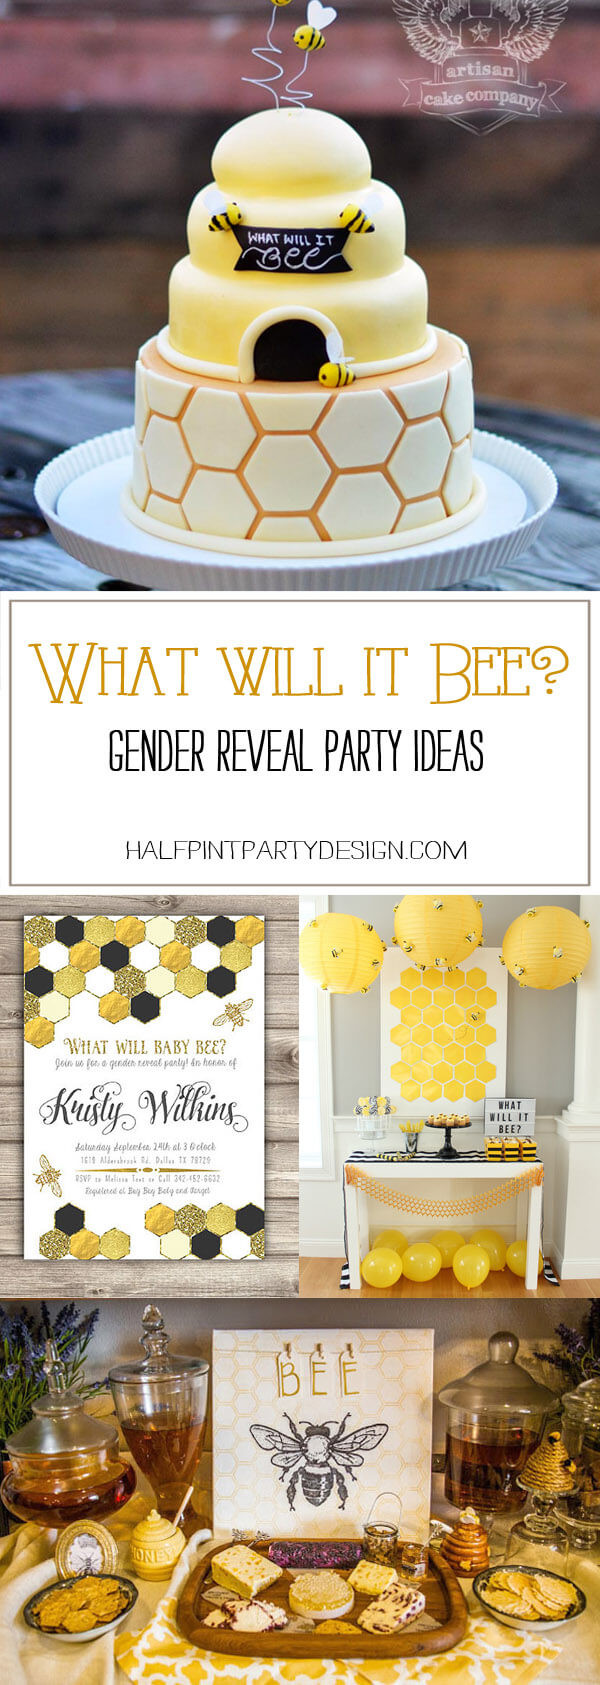 What Will It Bee Gender Reveal Party Ideas
 What Will it Bee Gender Reveal Party Ideas Parties With